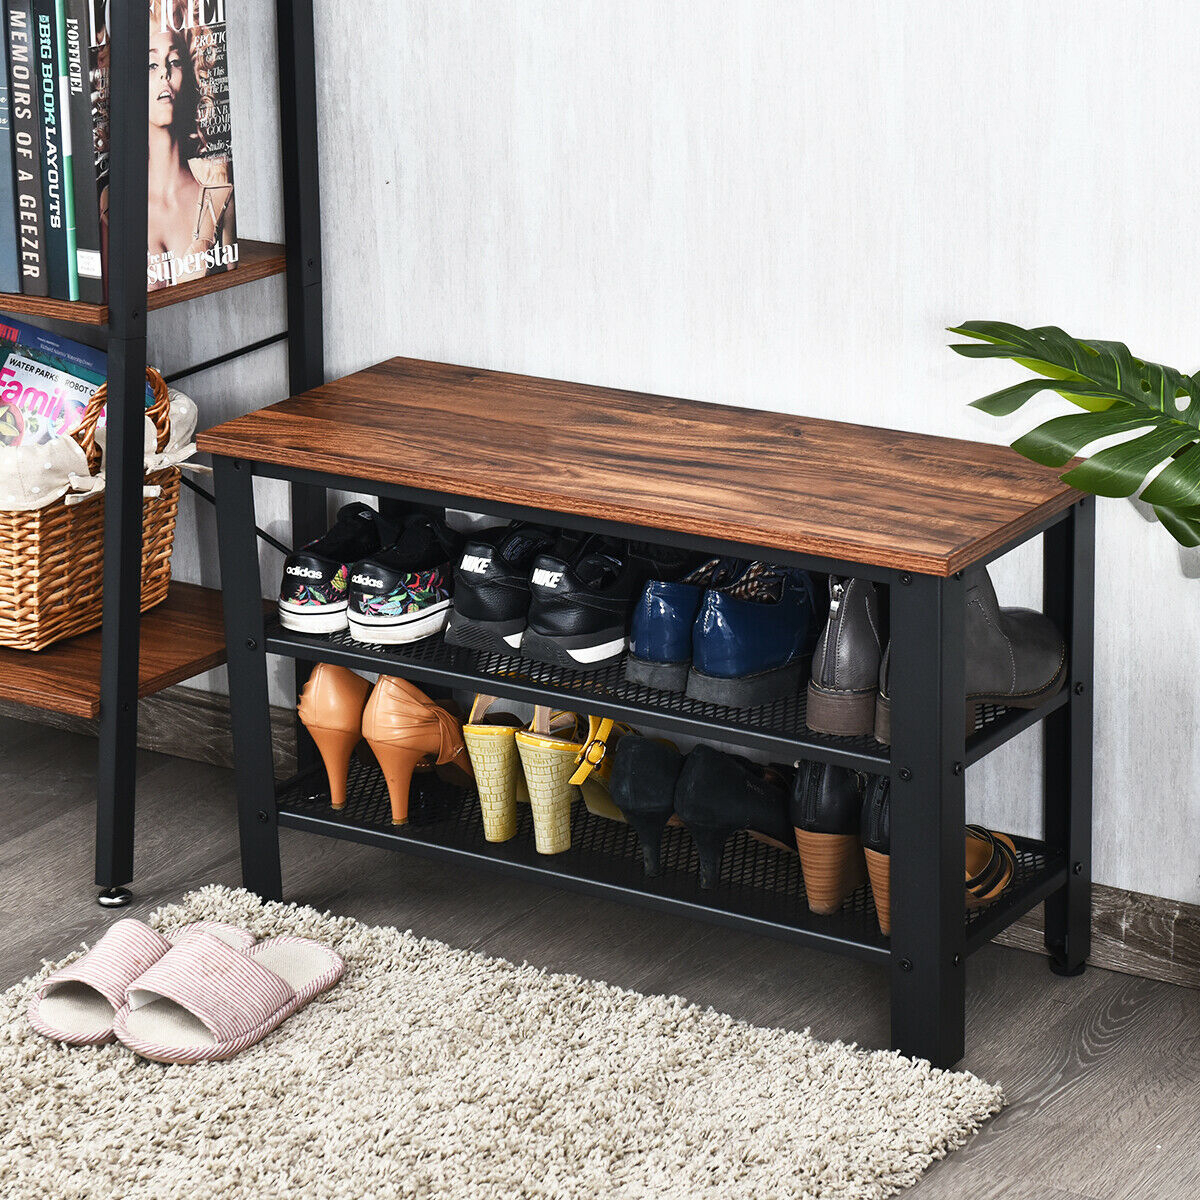 3-Tier Shoe Rack Industrial Shoe Bench With Storage Shelves For LivingRoom - Black And Brown